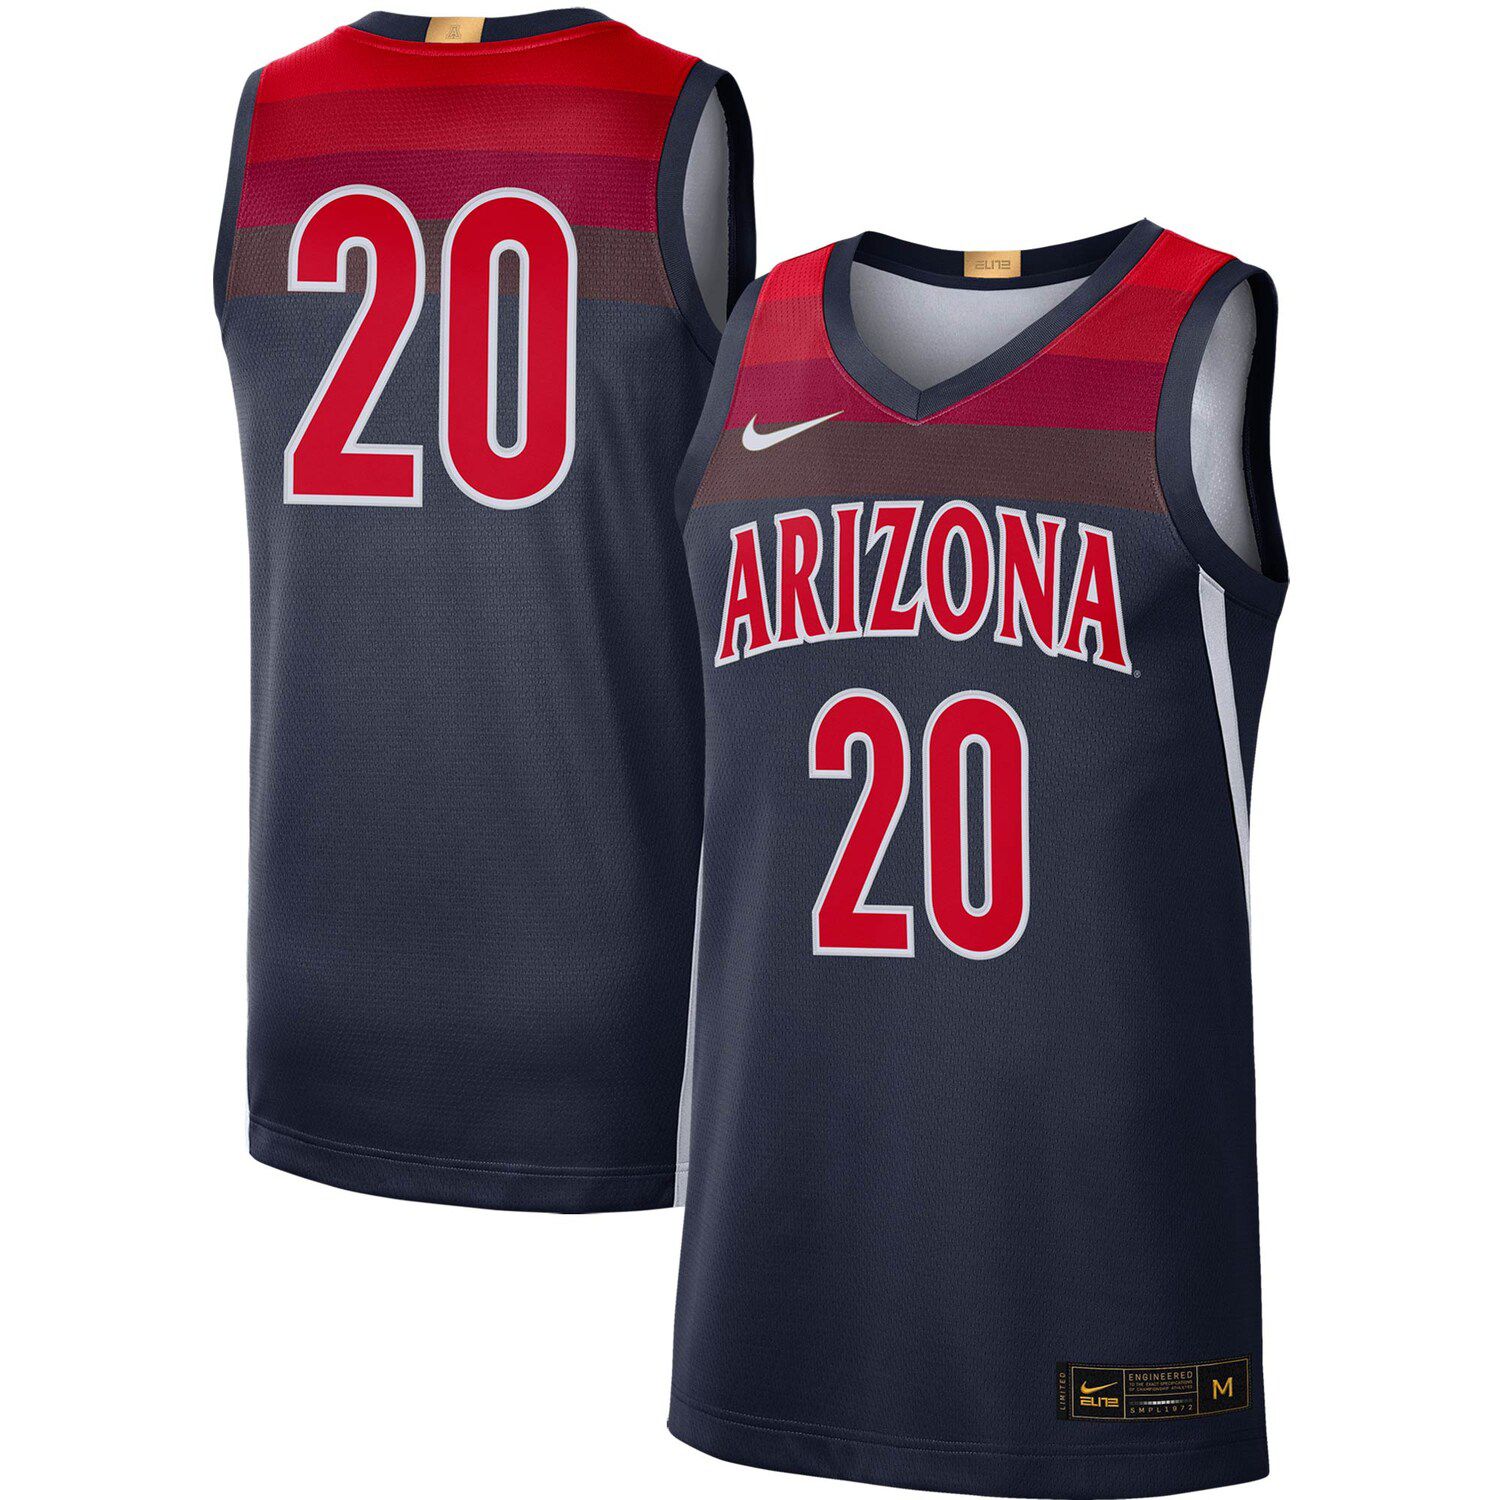 Wildcats official jersey